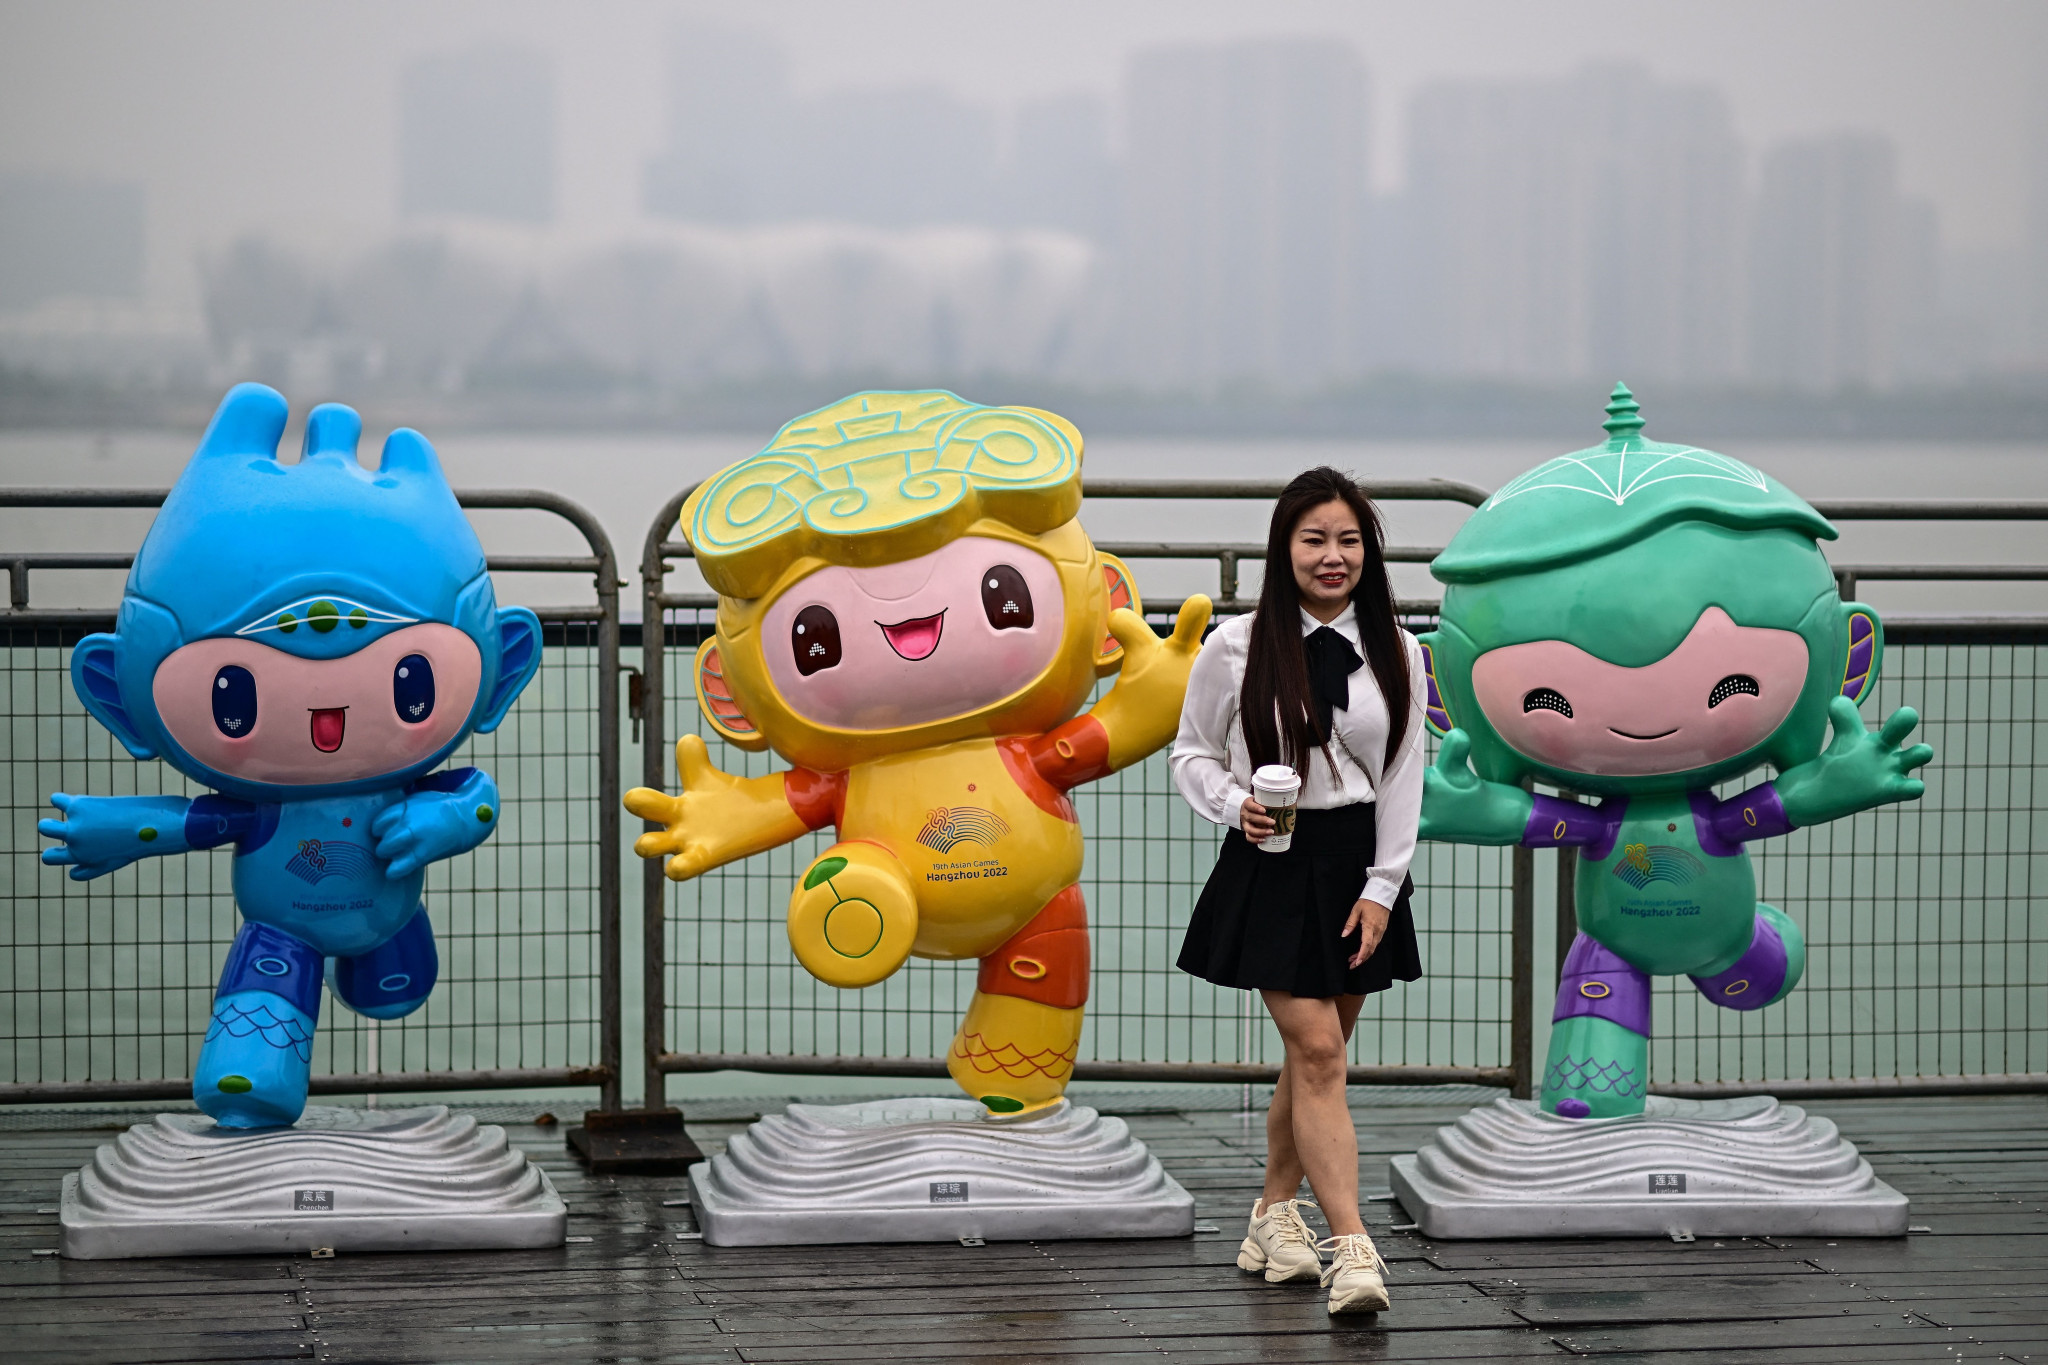 The Hangzhou 2022 mascots have proven to be a big hit during the Asian Games ©Getty Images